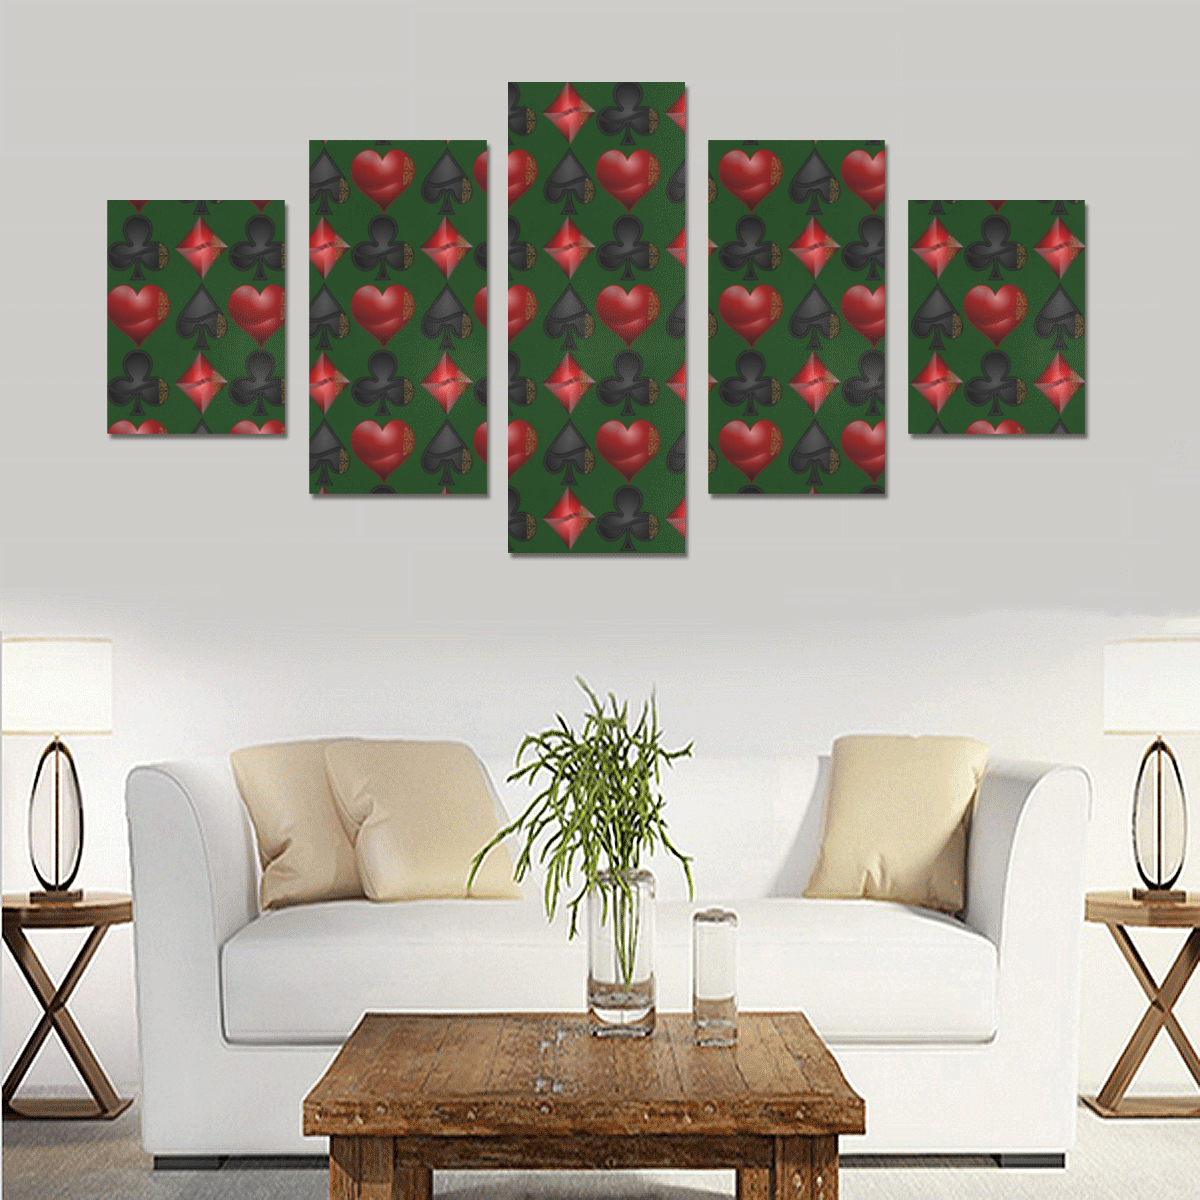 Las Vegas Black and Red Casino Poker Card Shapes on Green Canvas Print Sets B (No Frame)